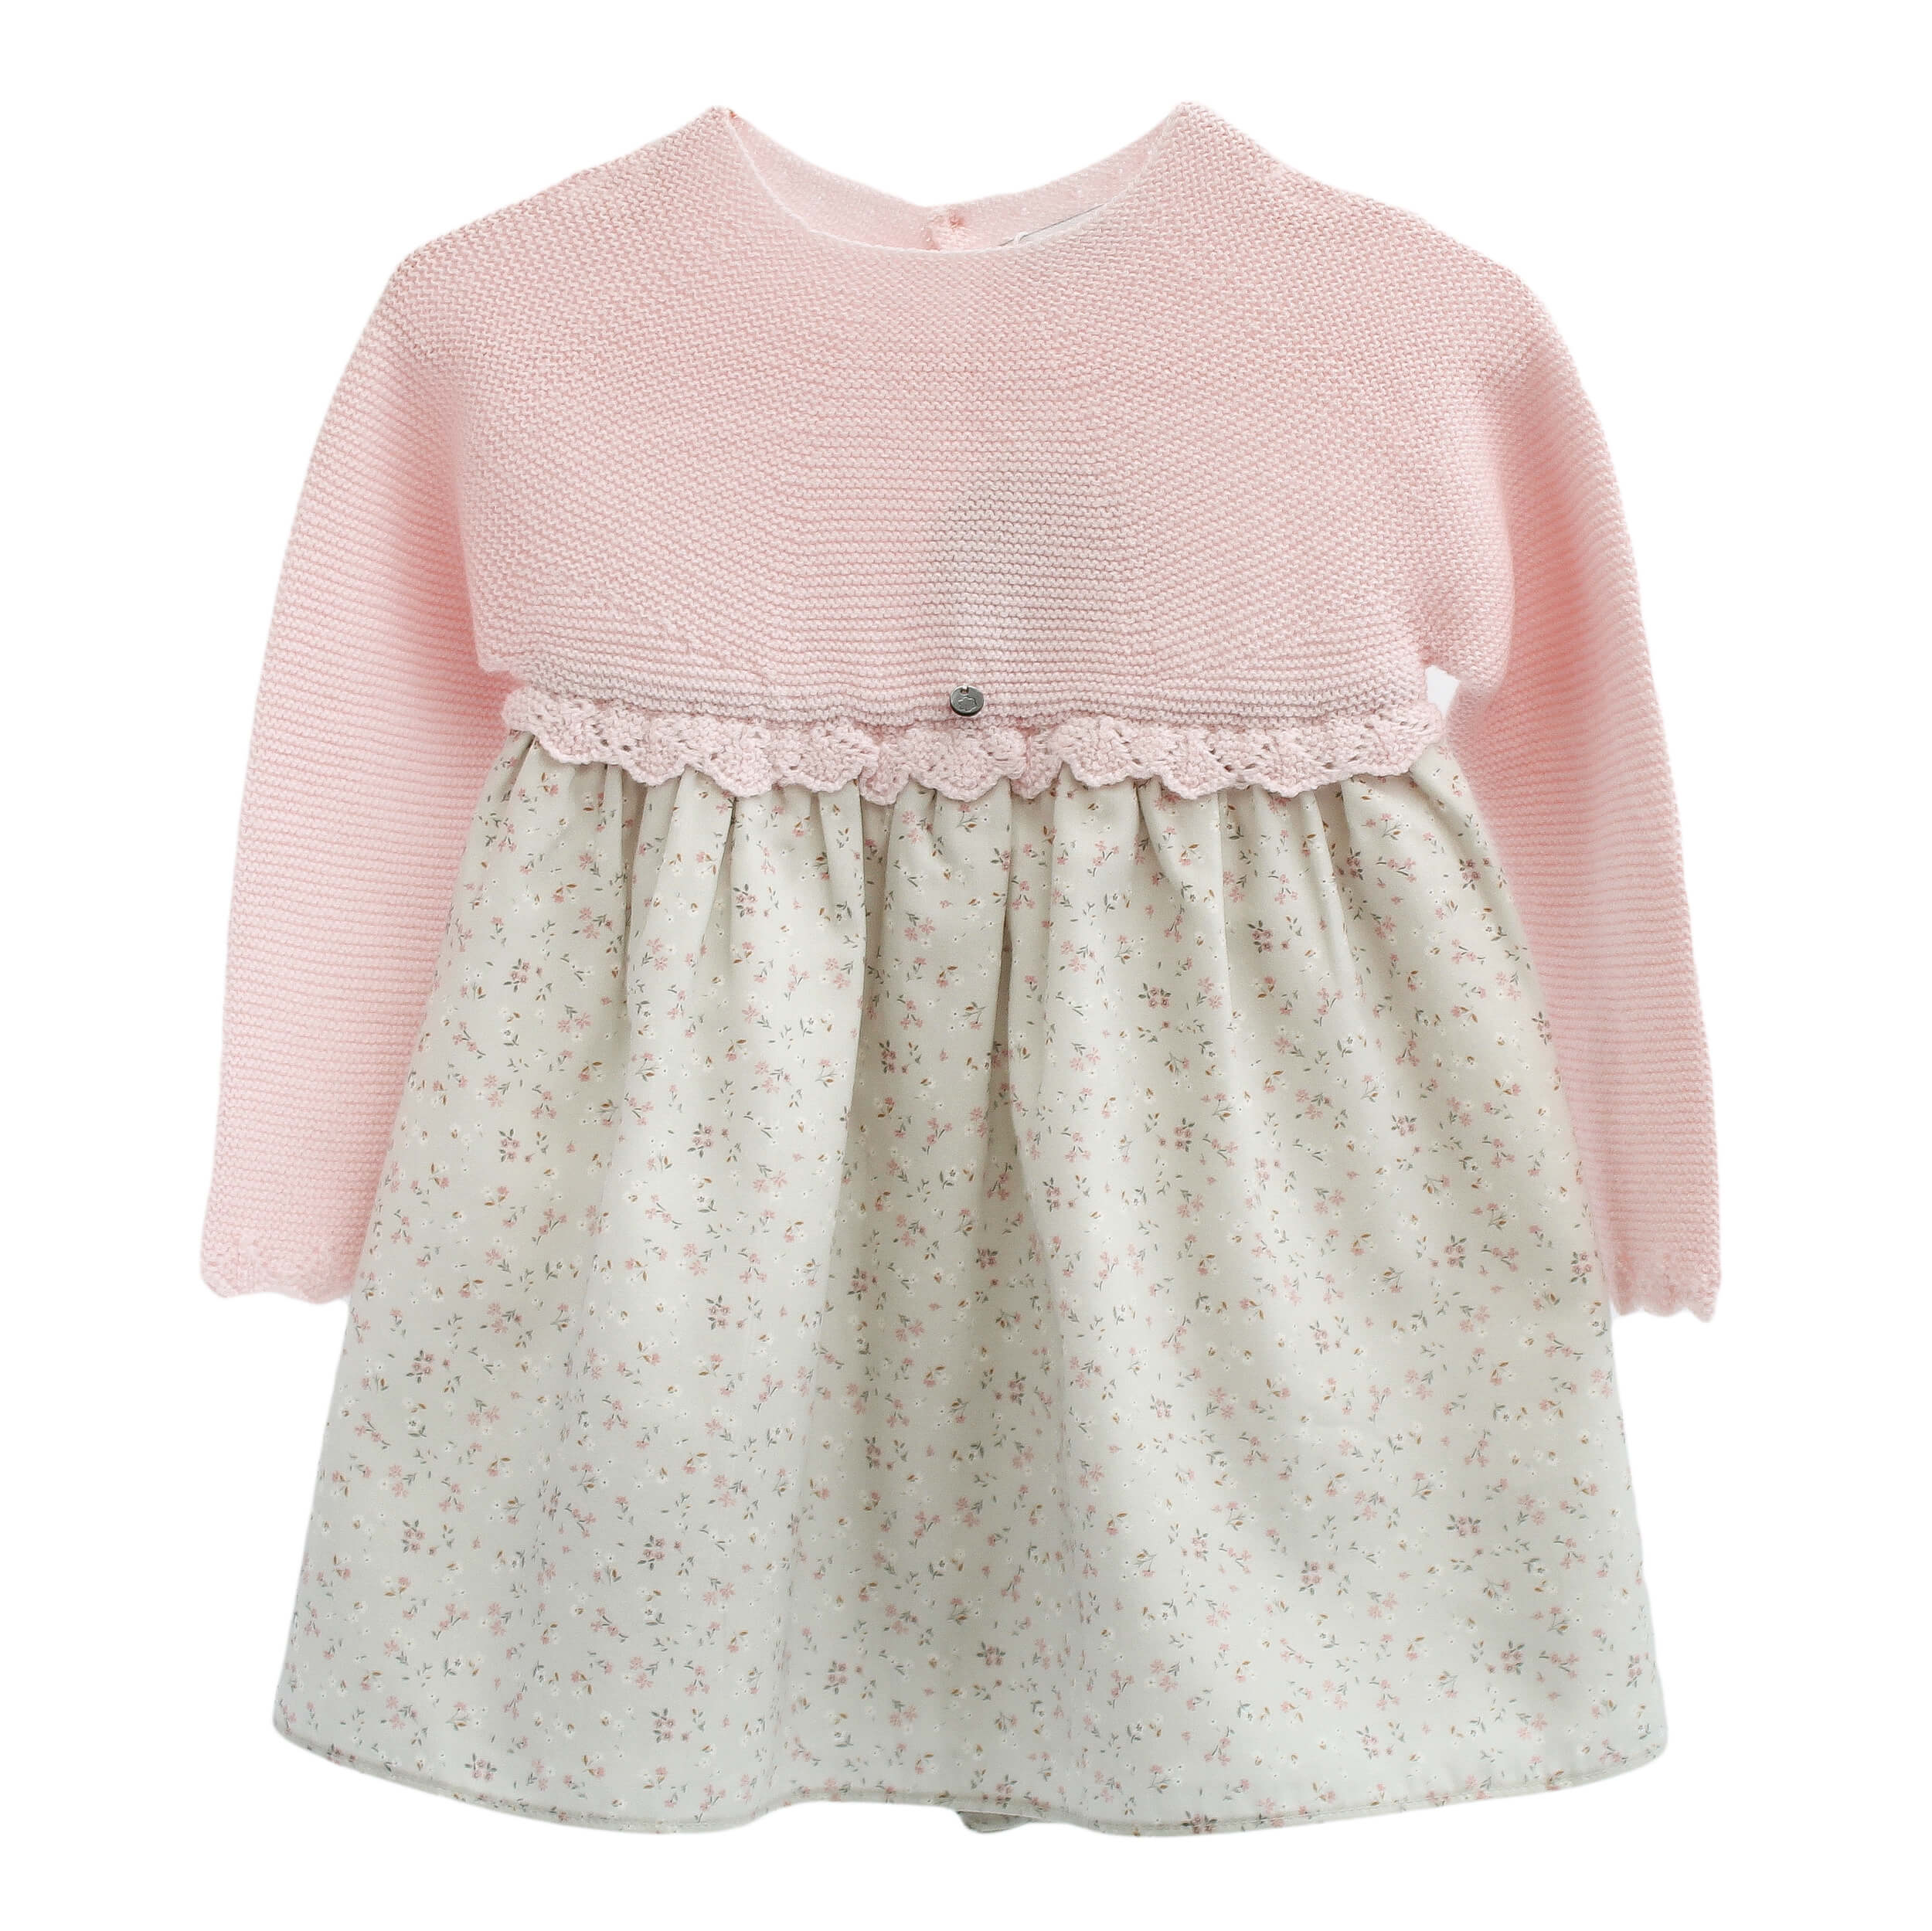 wedoble half knit baby dress, made in portugal 